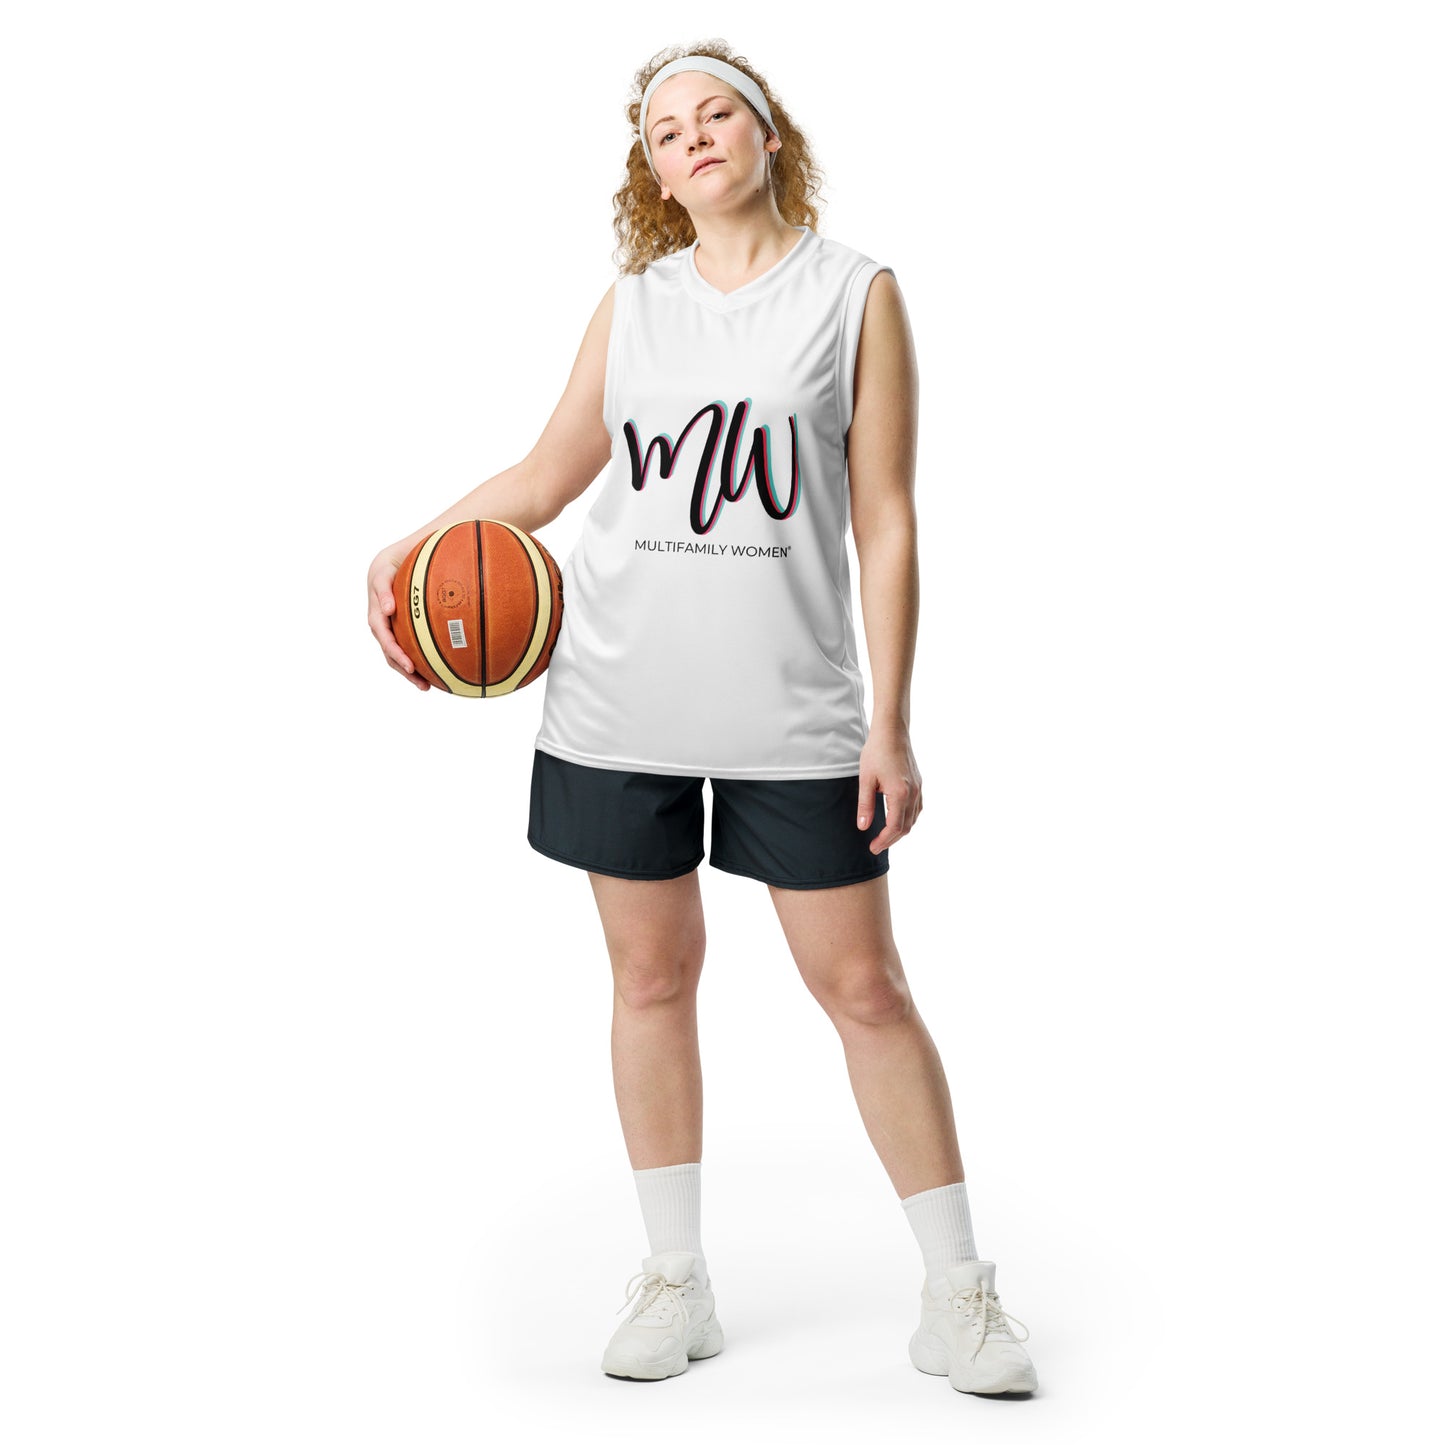 The Multifam-Champ - Recycled Basketball Jersey by Multifamily Women®